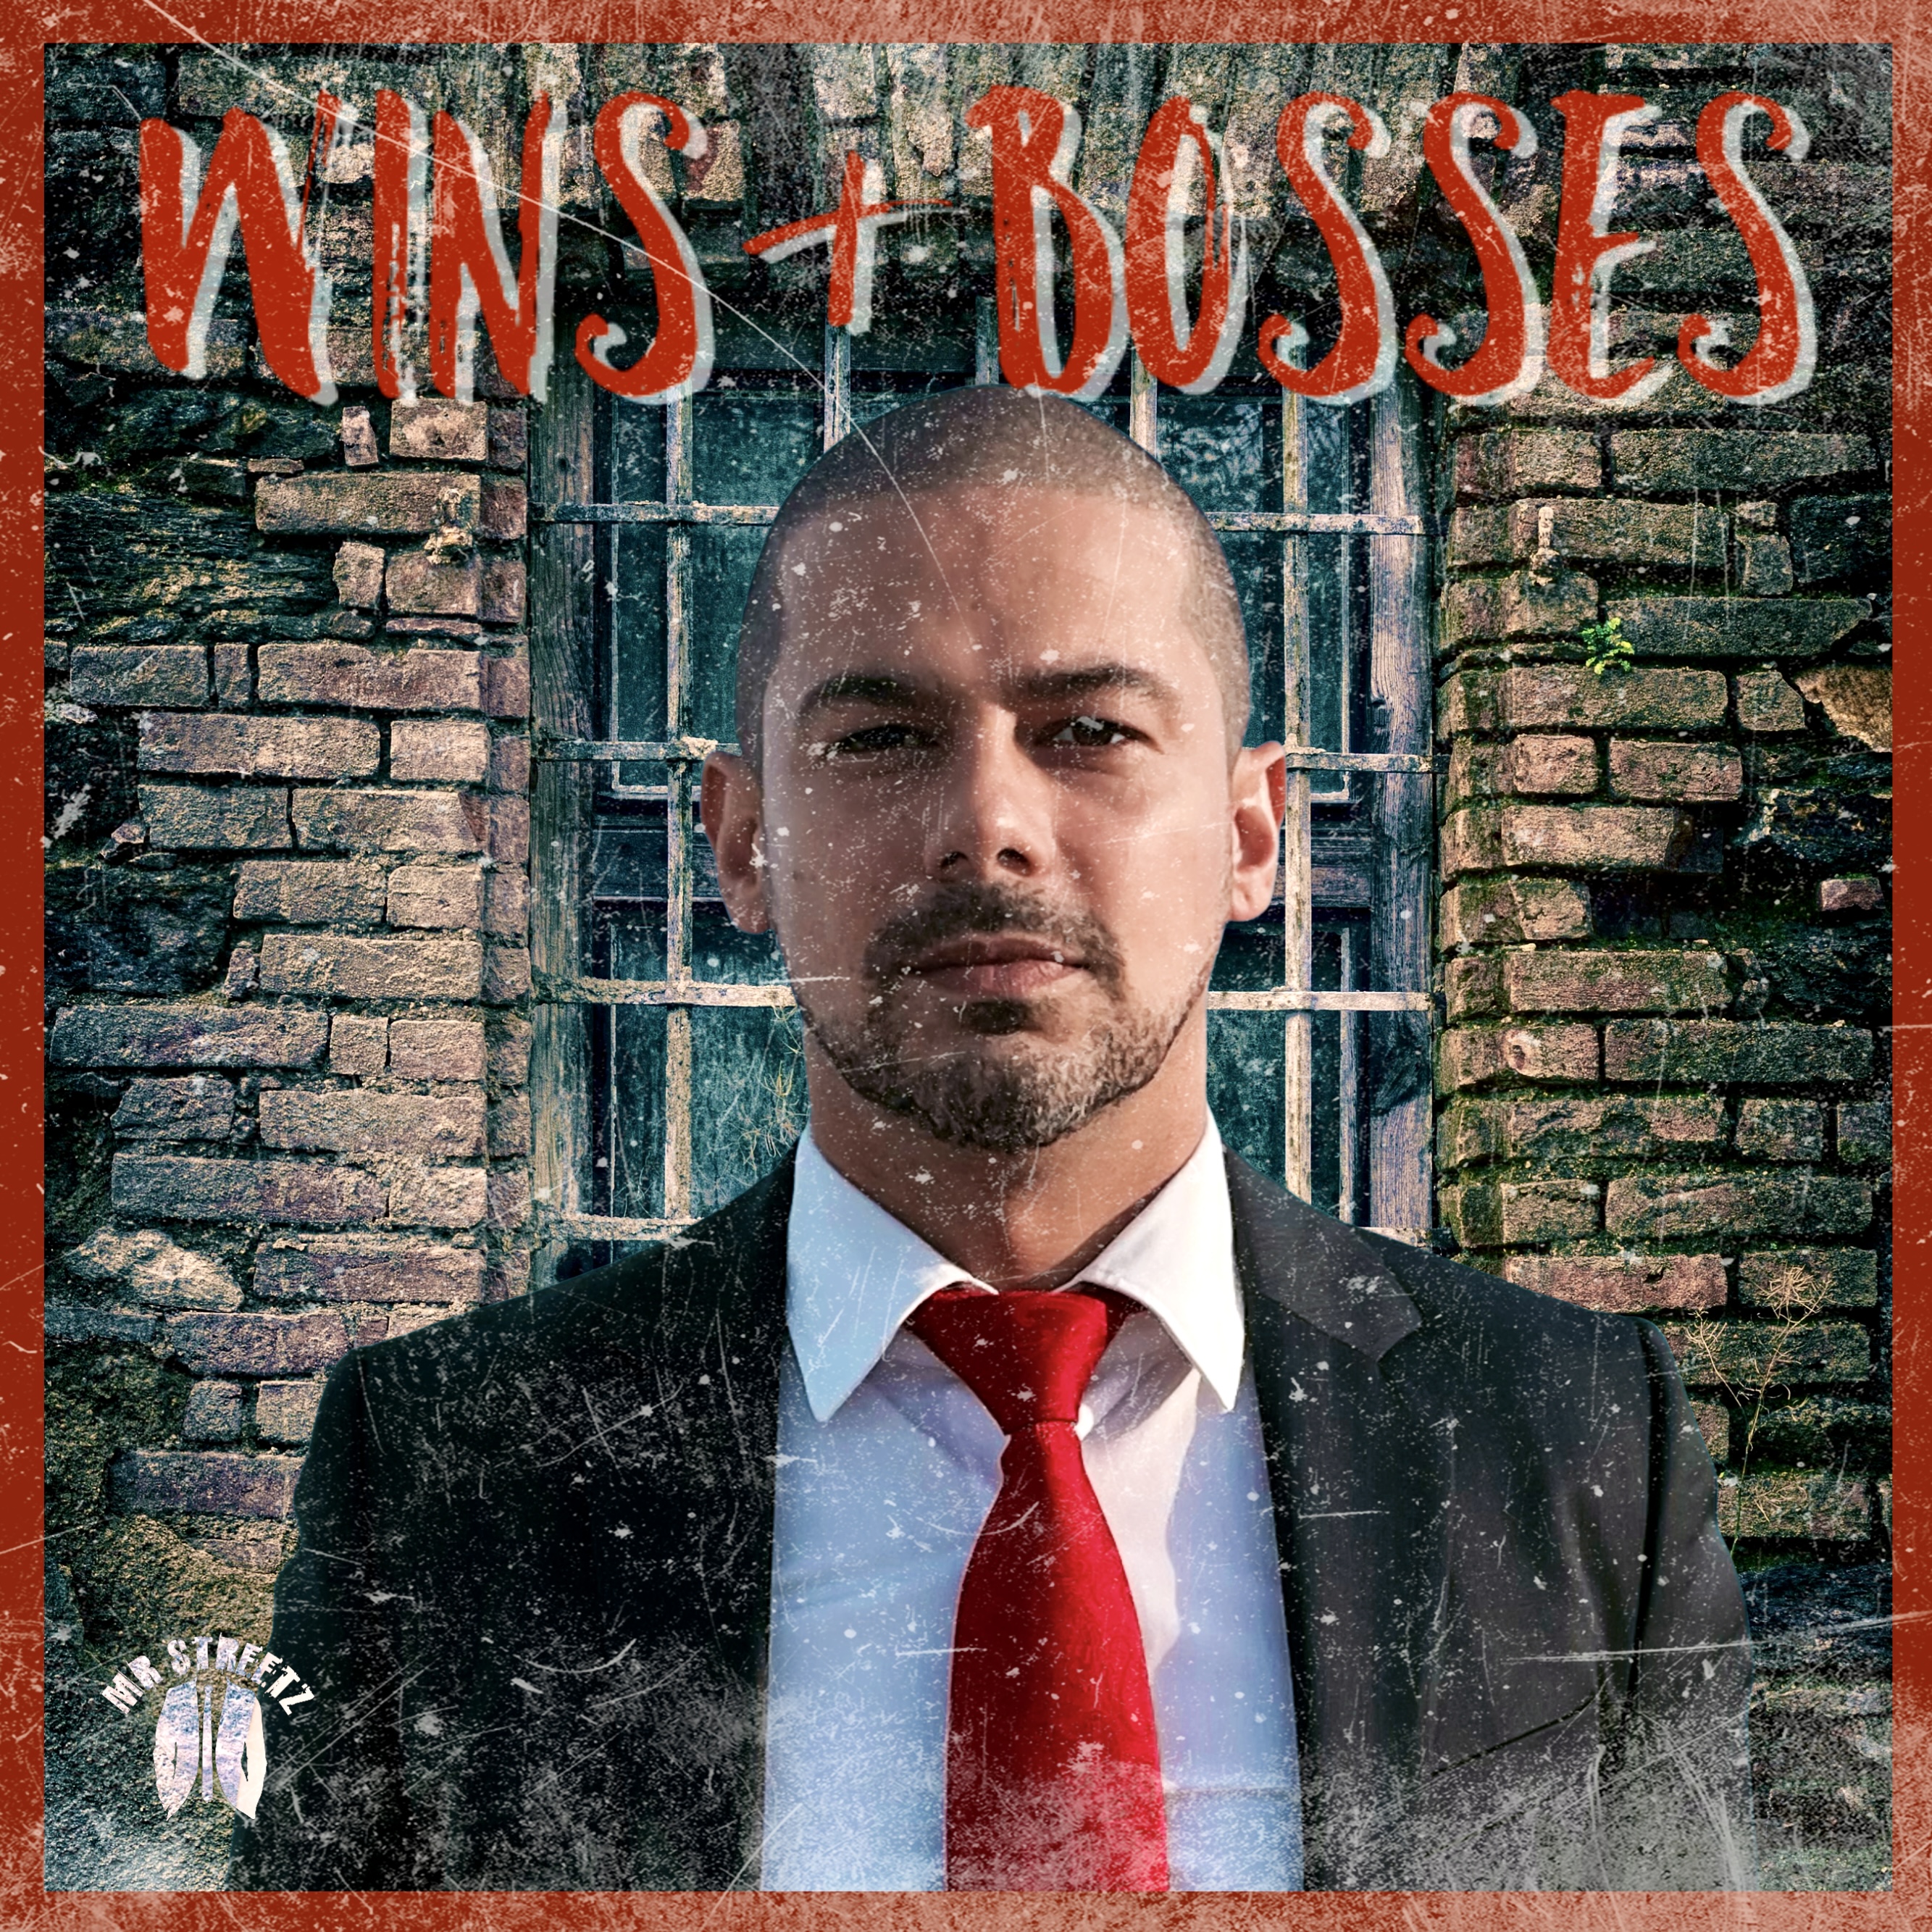 Artwork for upcoming album titled Wins  Bosses scheduled to be released March 2023